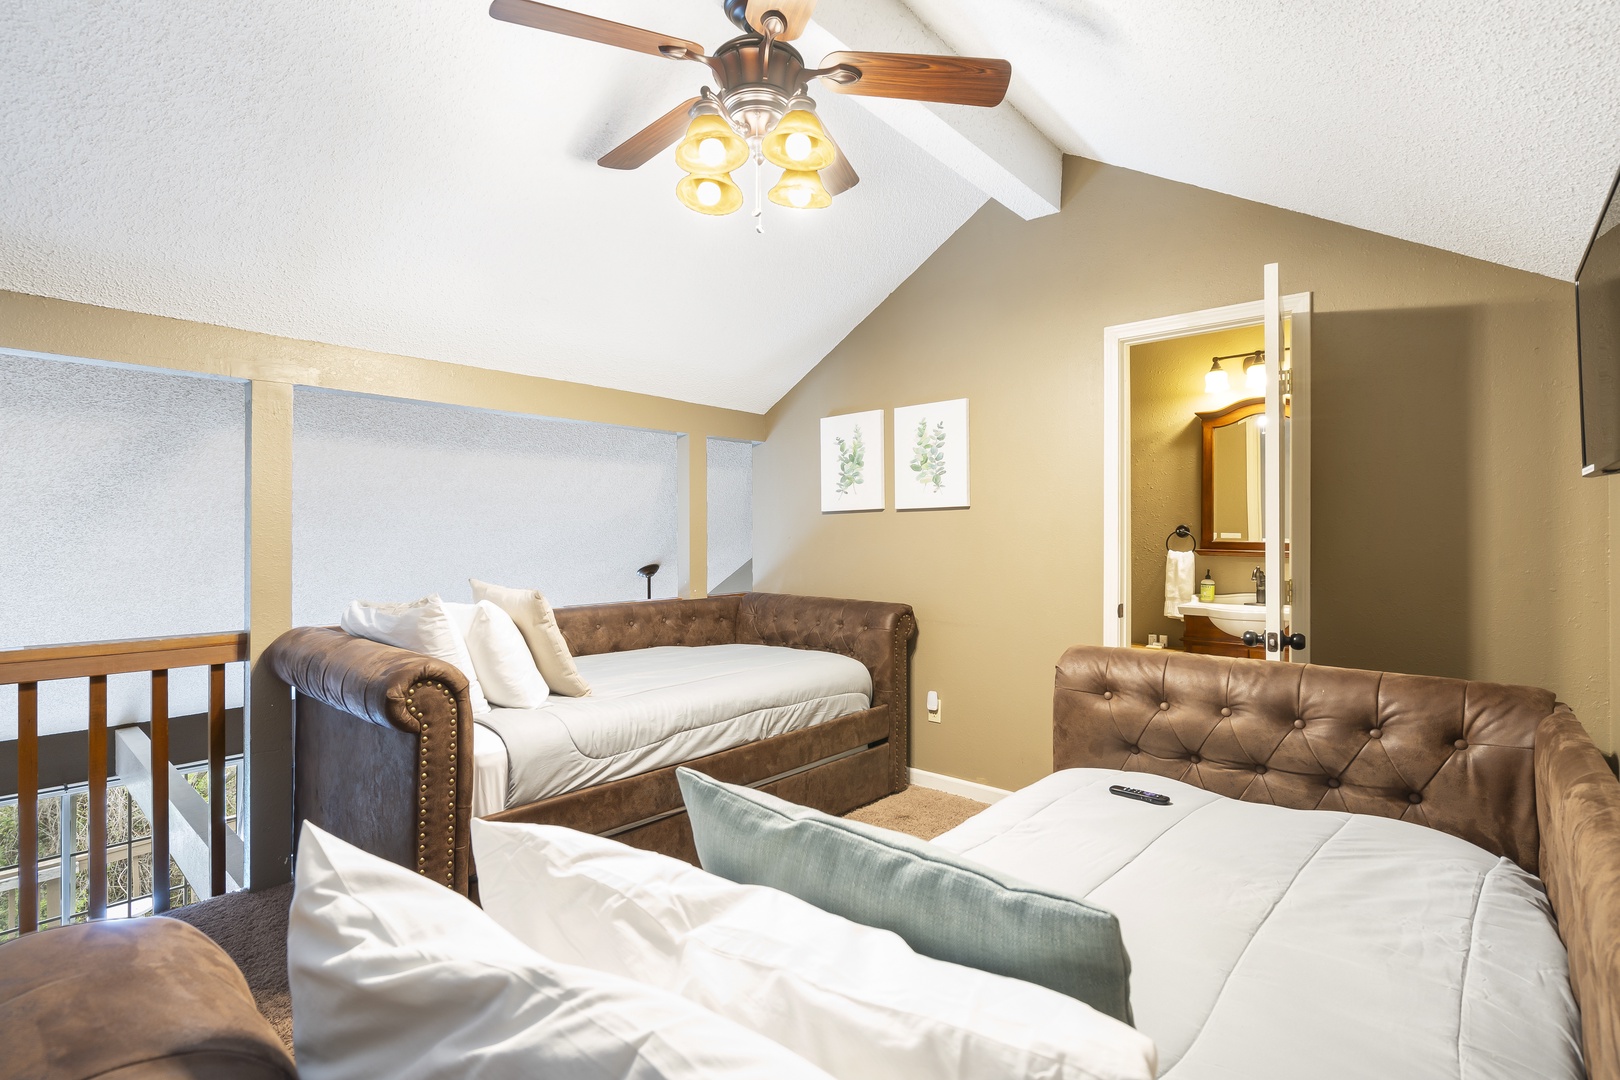 The loft bedroom offers 2 twin beds with trundles, private ensuite, & Smart TV